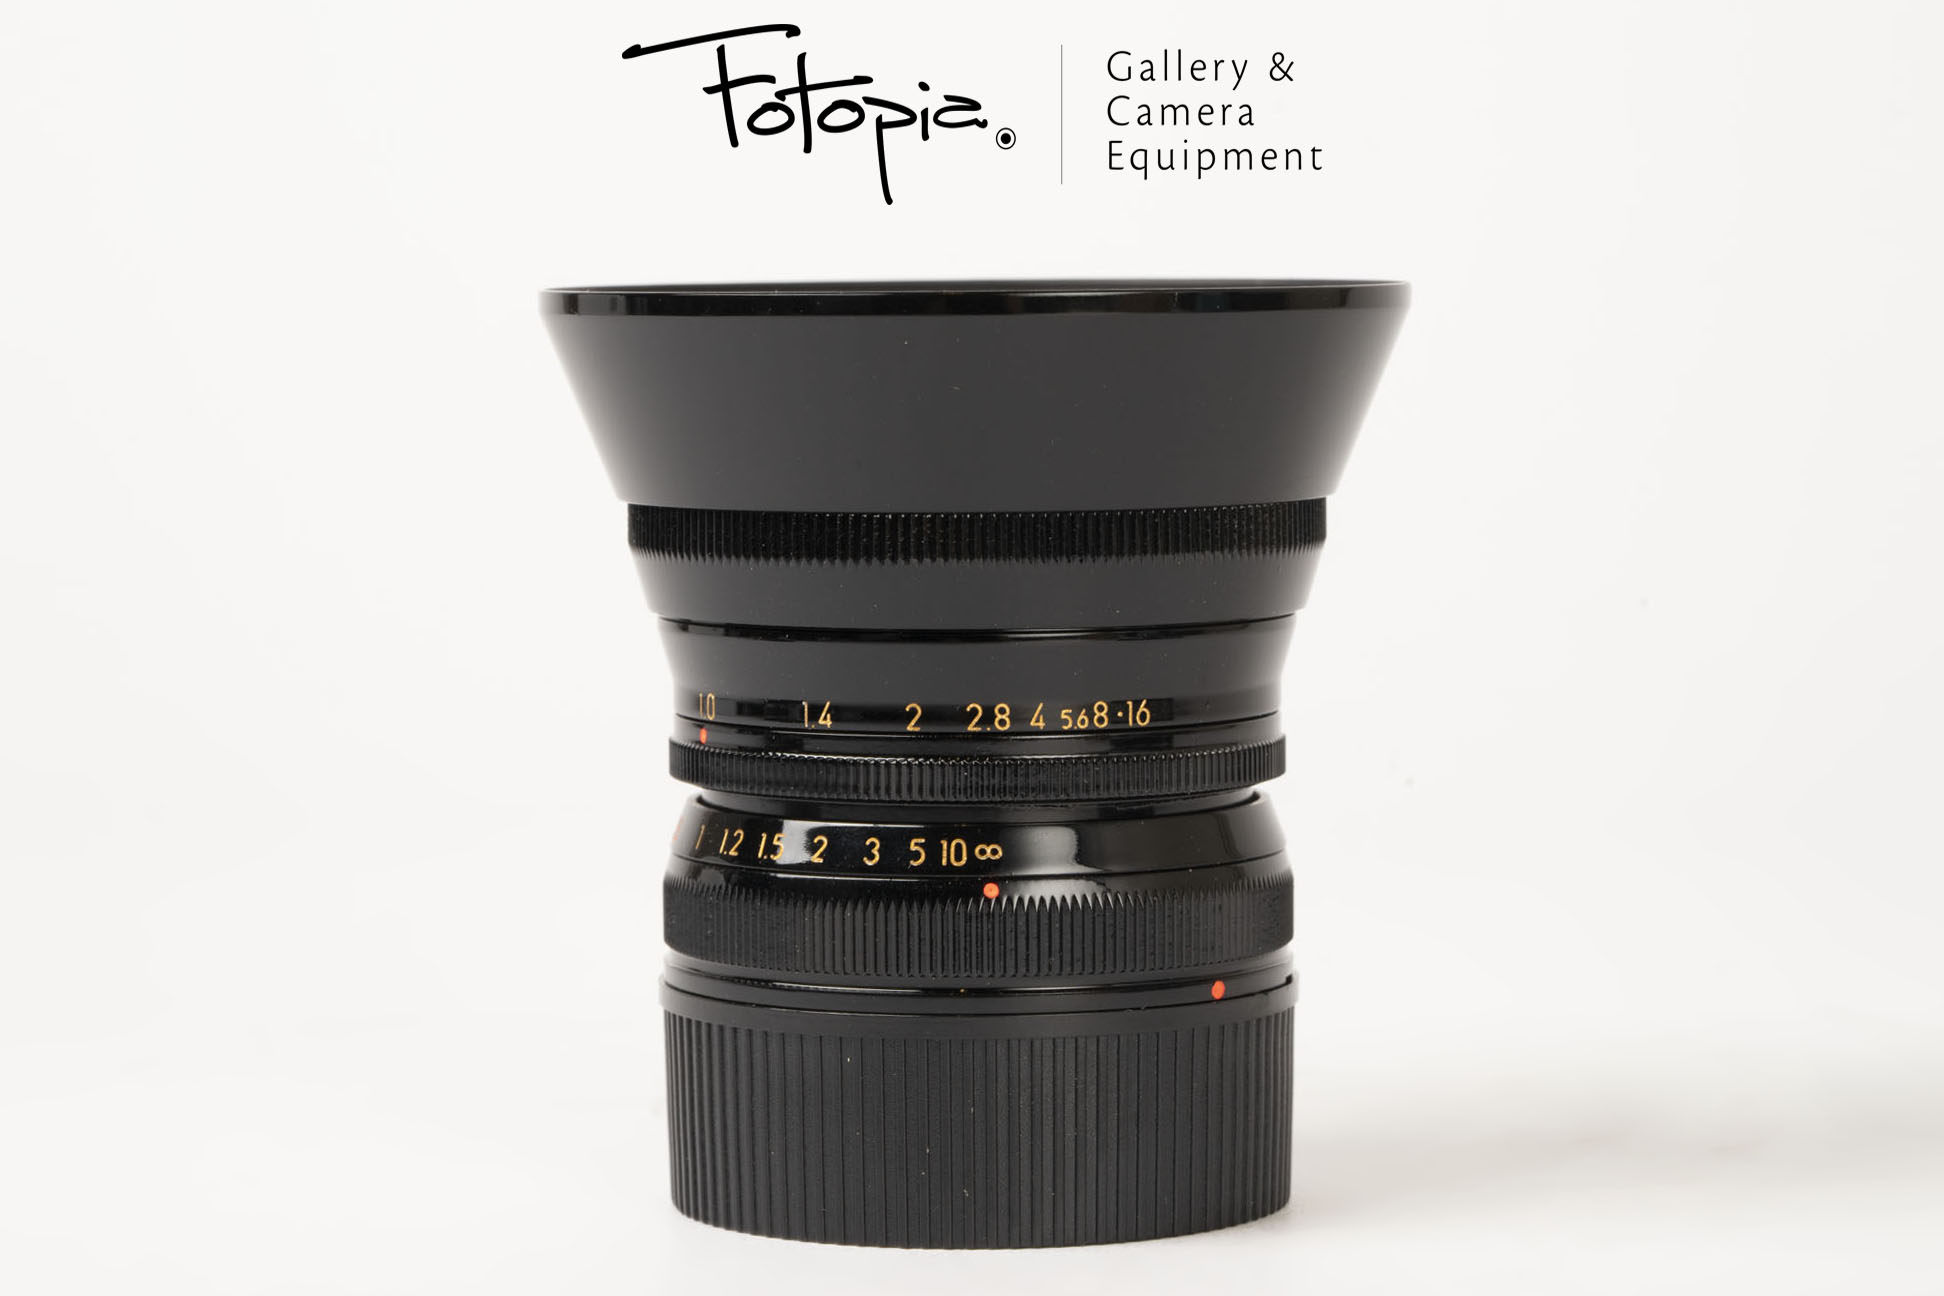 The MS-Optical ISM 50mm f/1.0 F.MC lens for Leica M-mount is now 